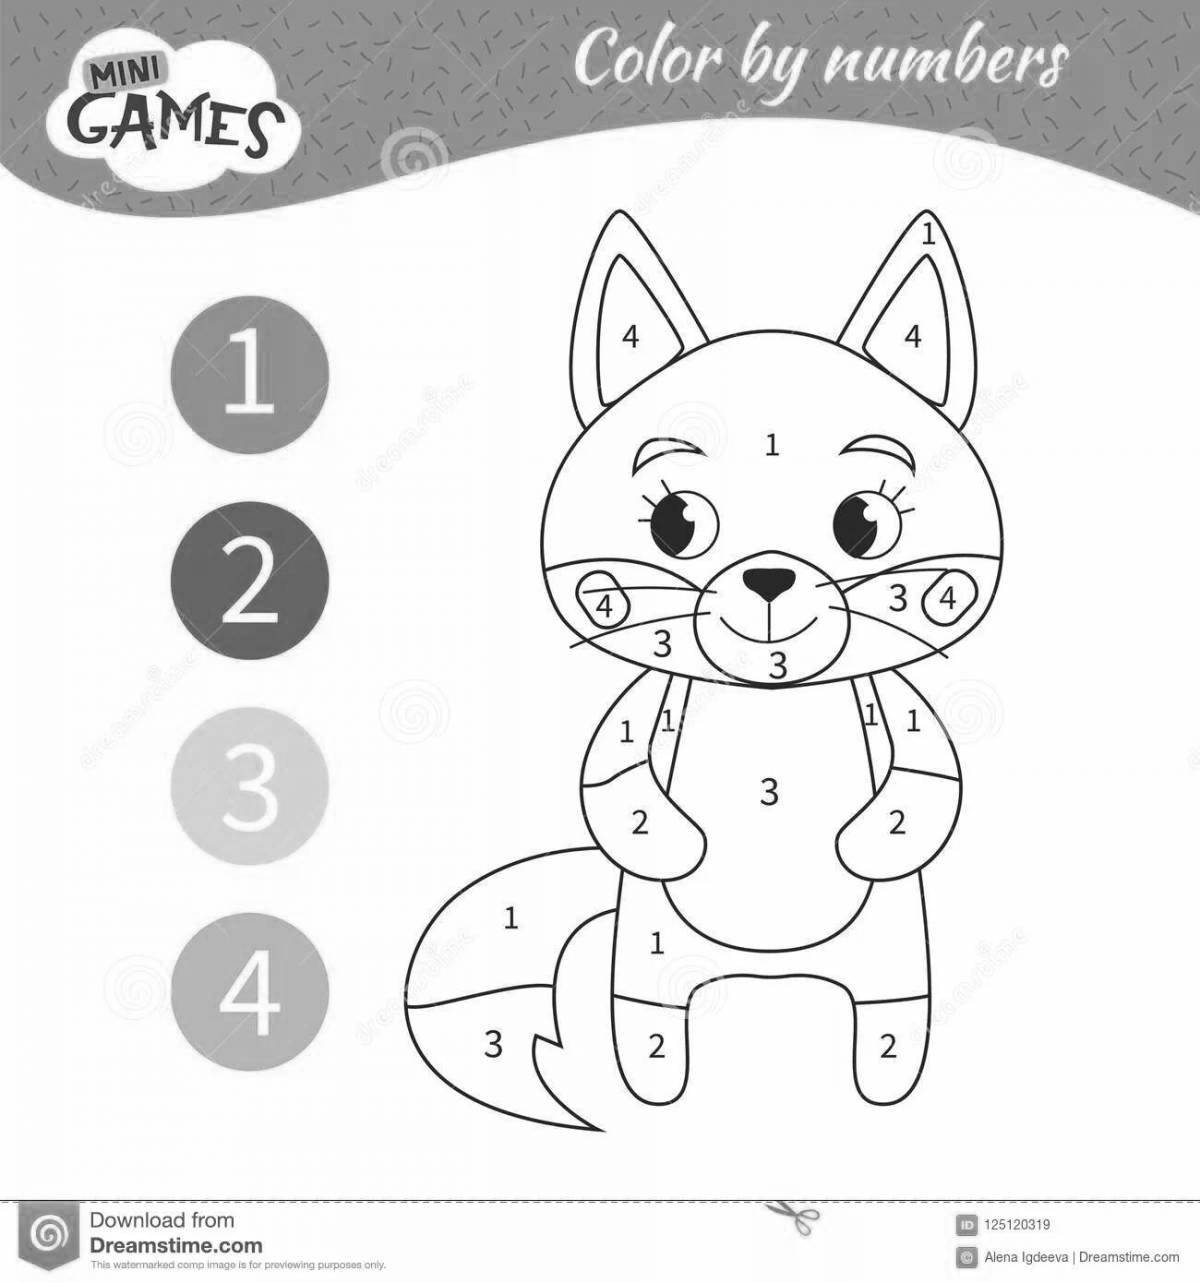 Fox complex coloring by numbers